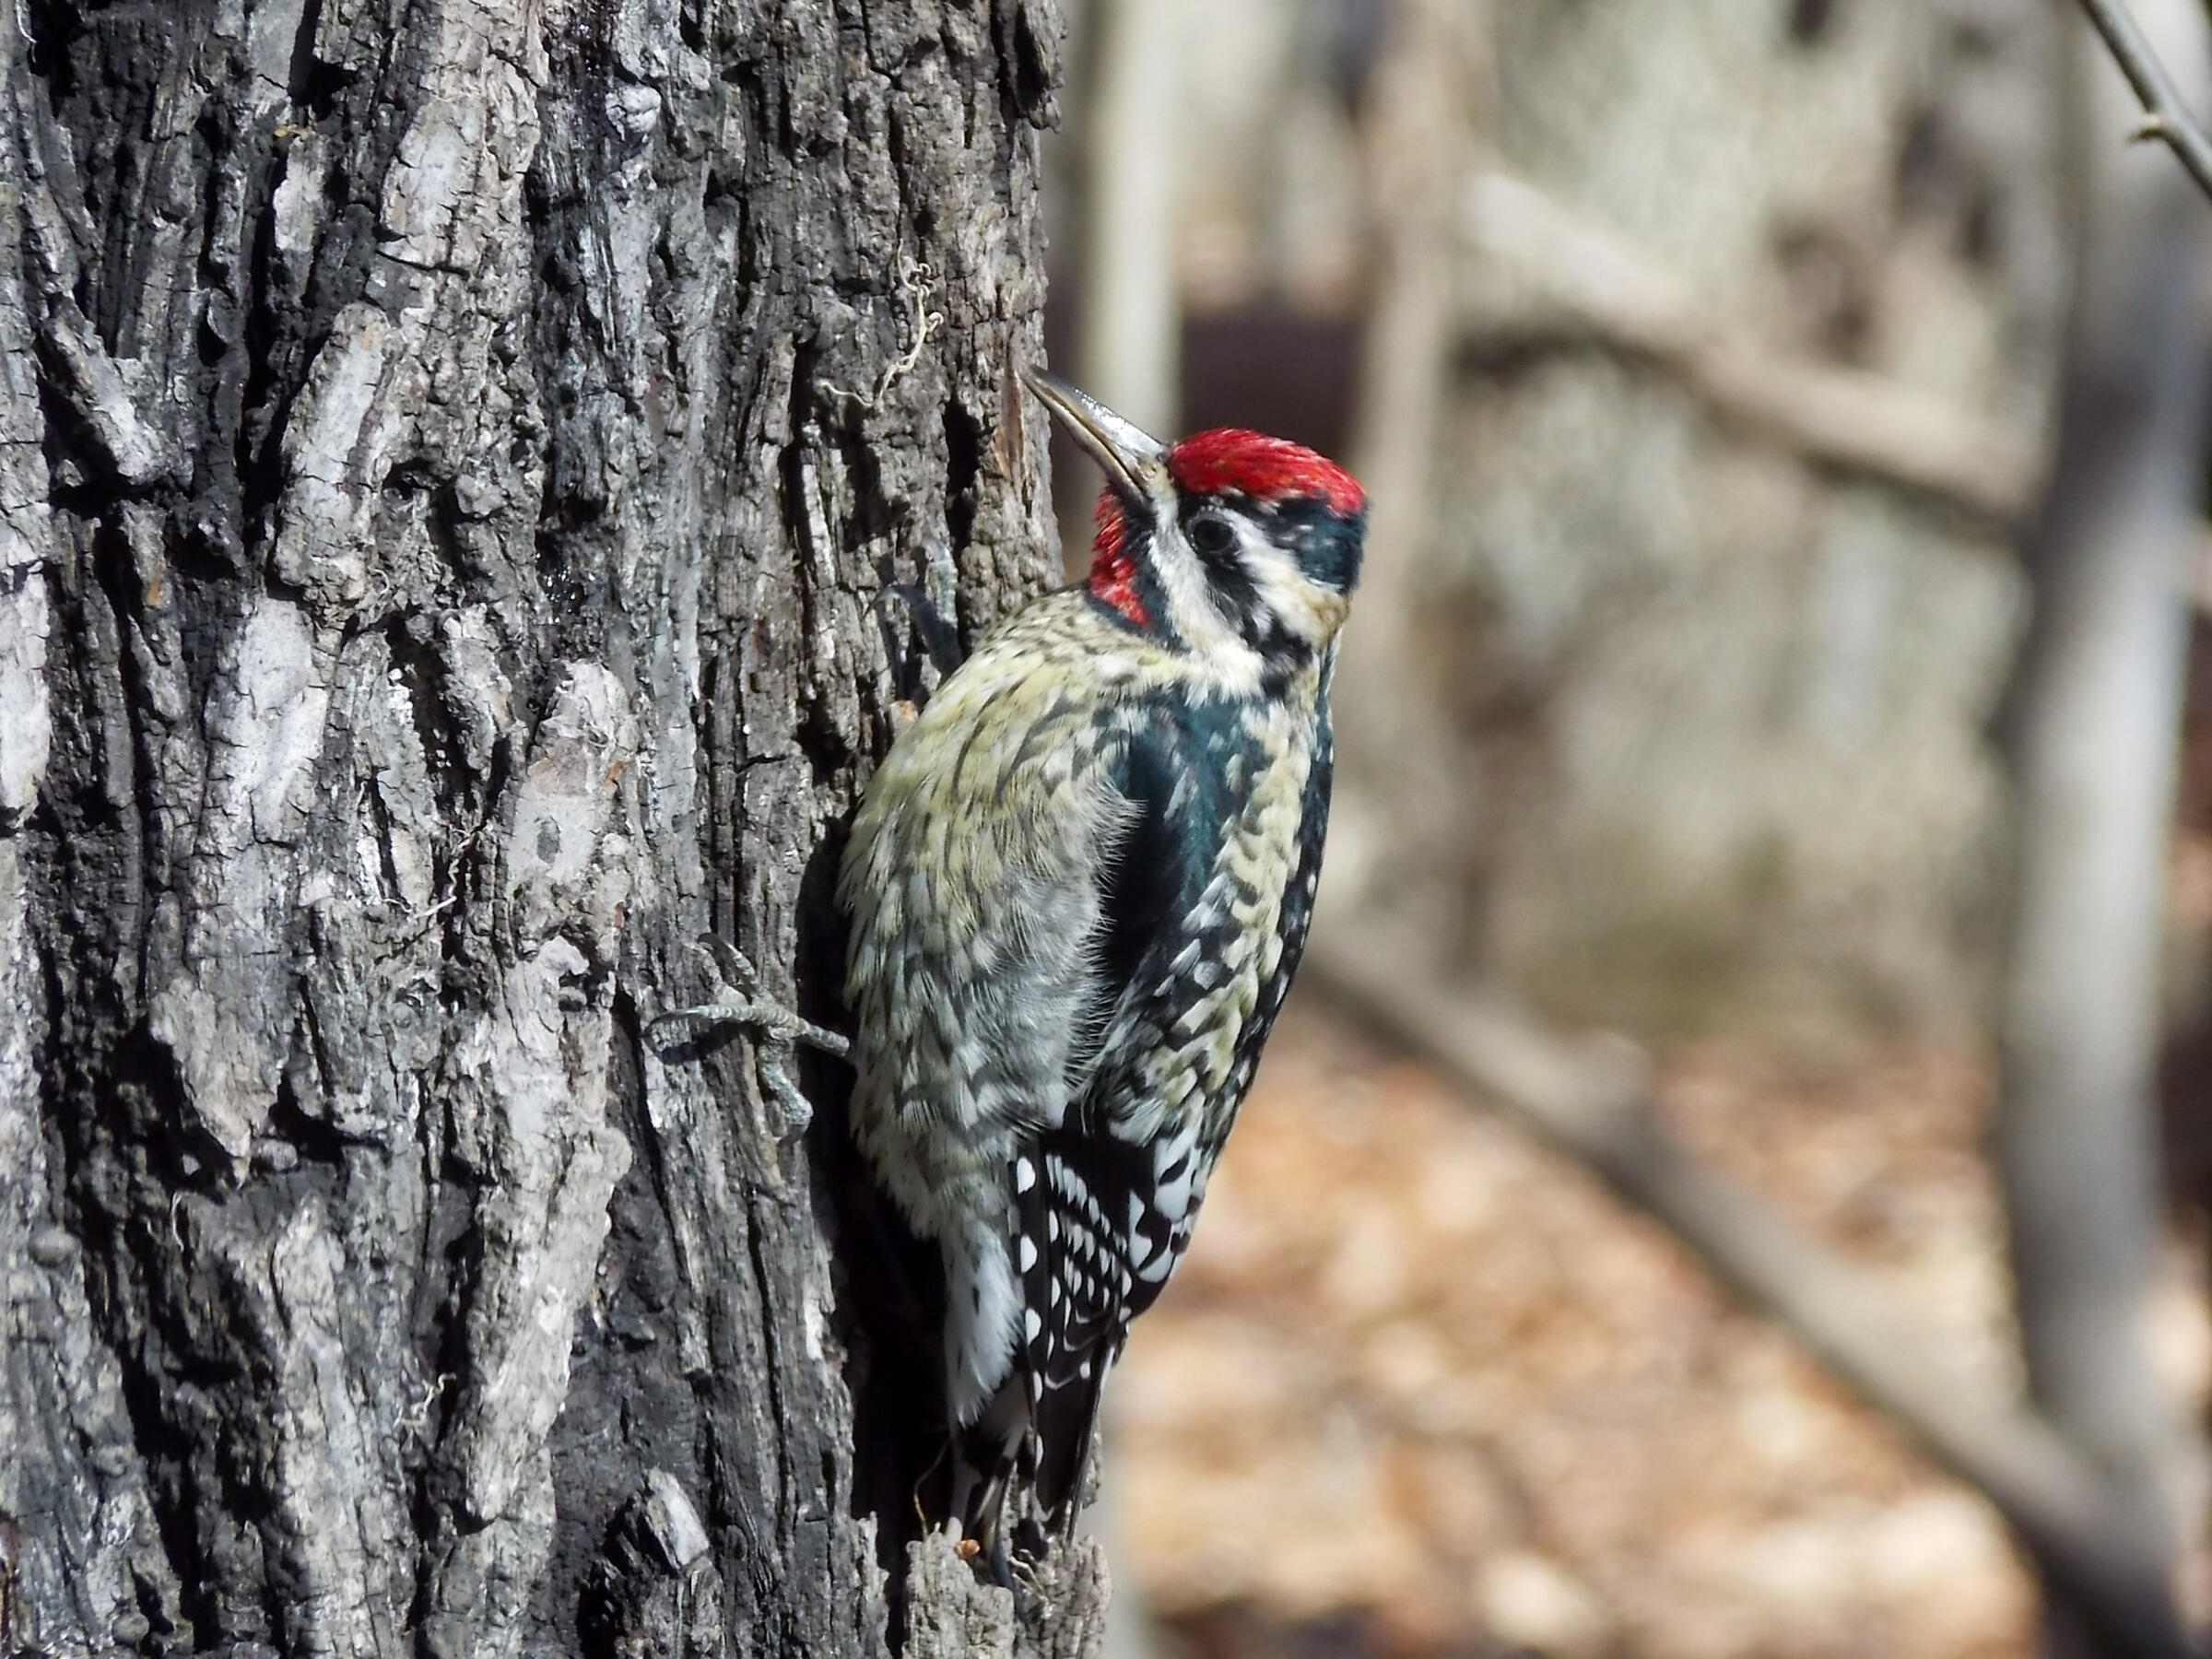 Close up of Yellow-bellied Sapsucker perched vertically on a tree, it has a red forehead and neck, cream colored chest and wing, and black and white spotted wing and body.